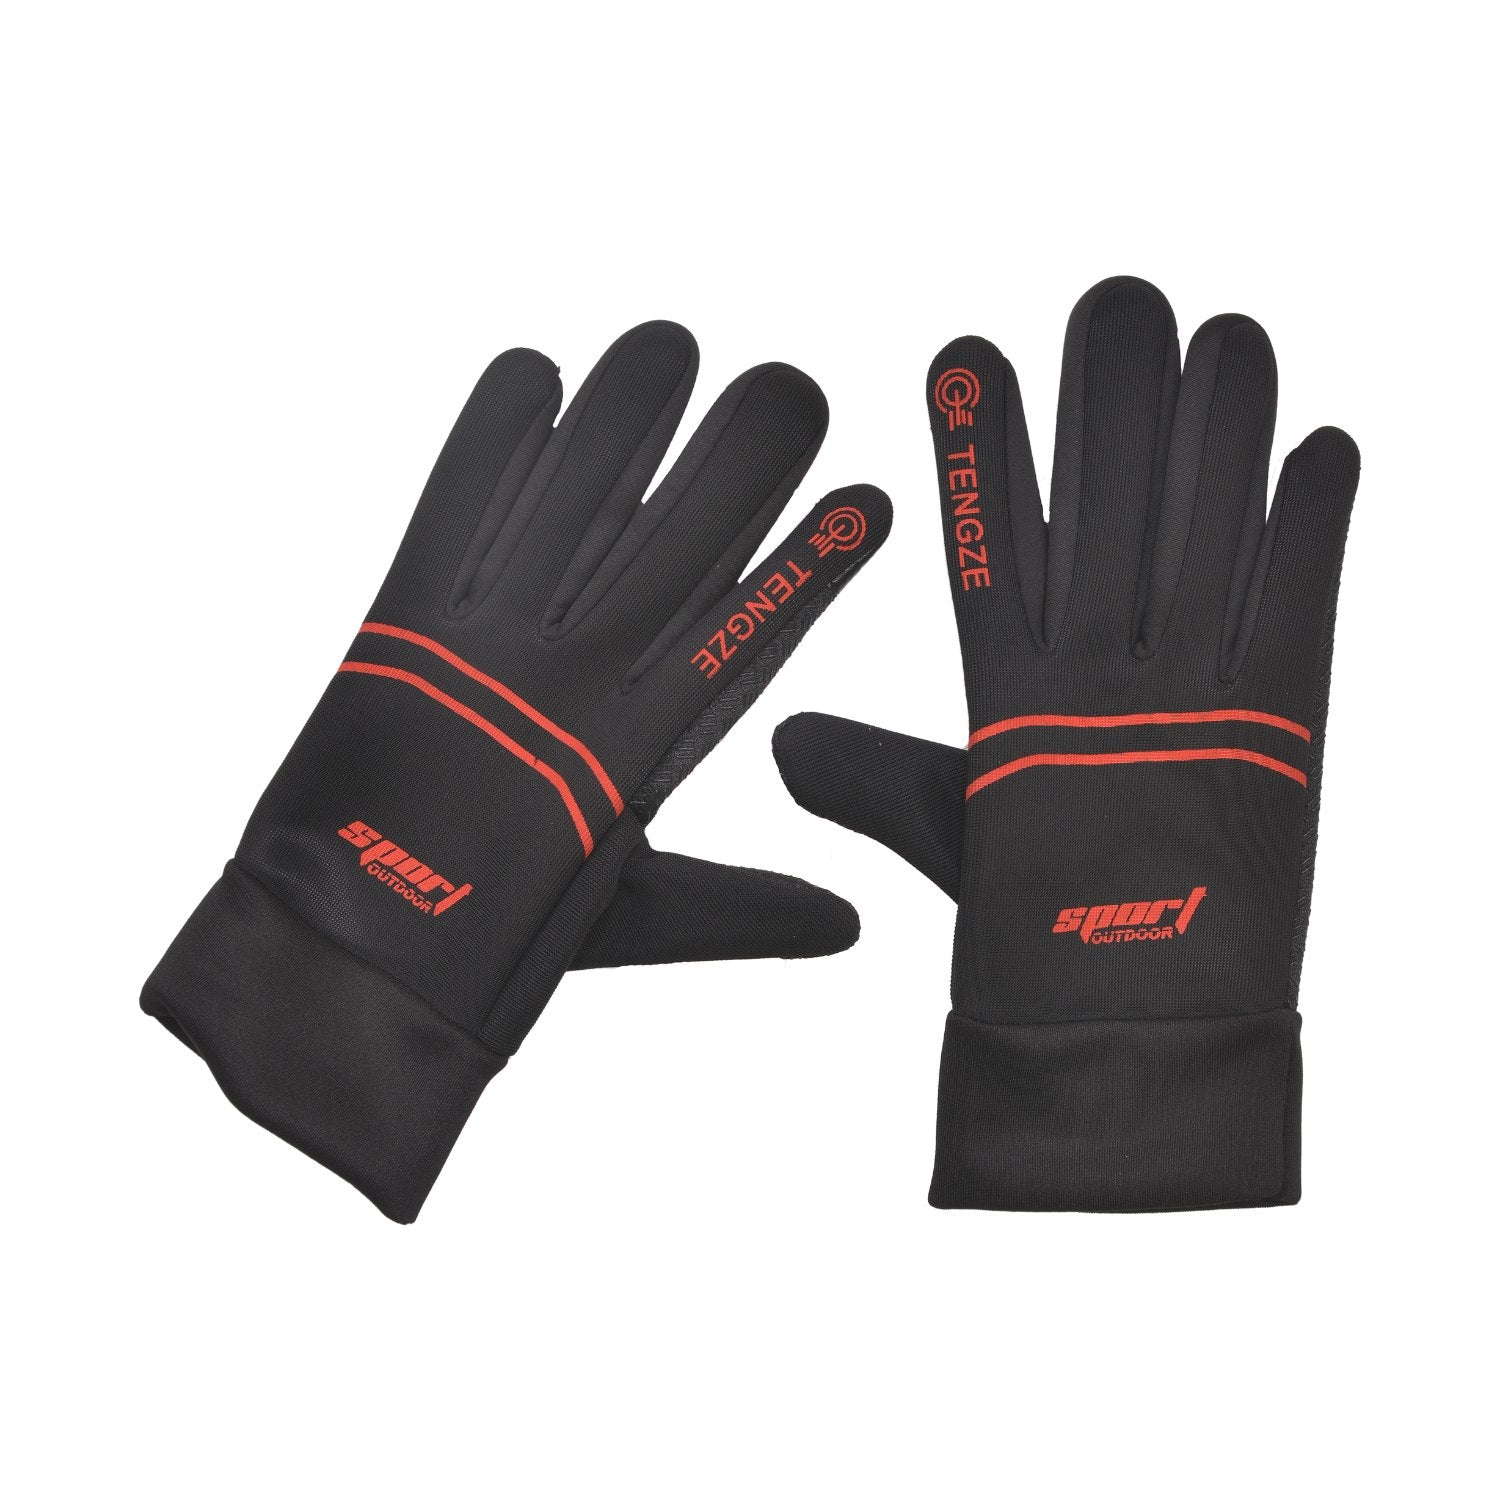 Buy Kaza Cold Weather Windproof Gloves at Gokyo Outdoor Clothing & Gear